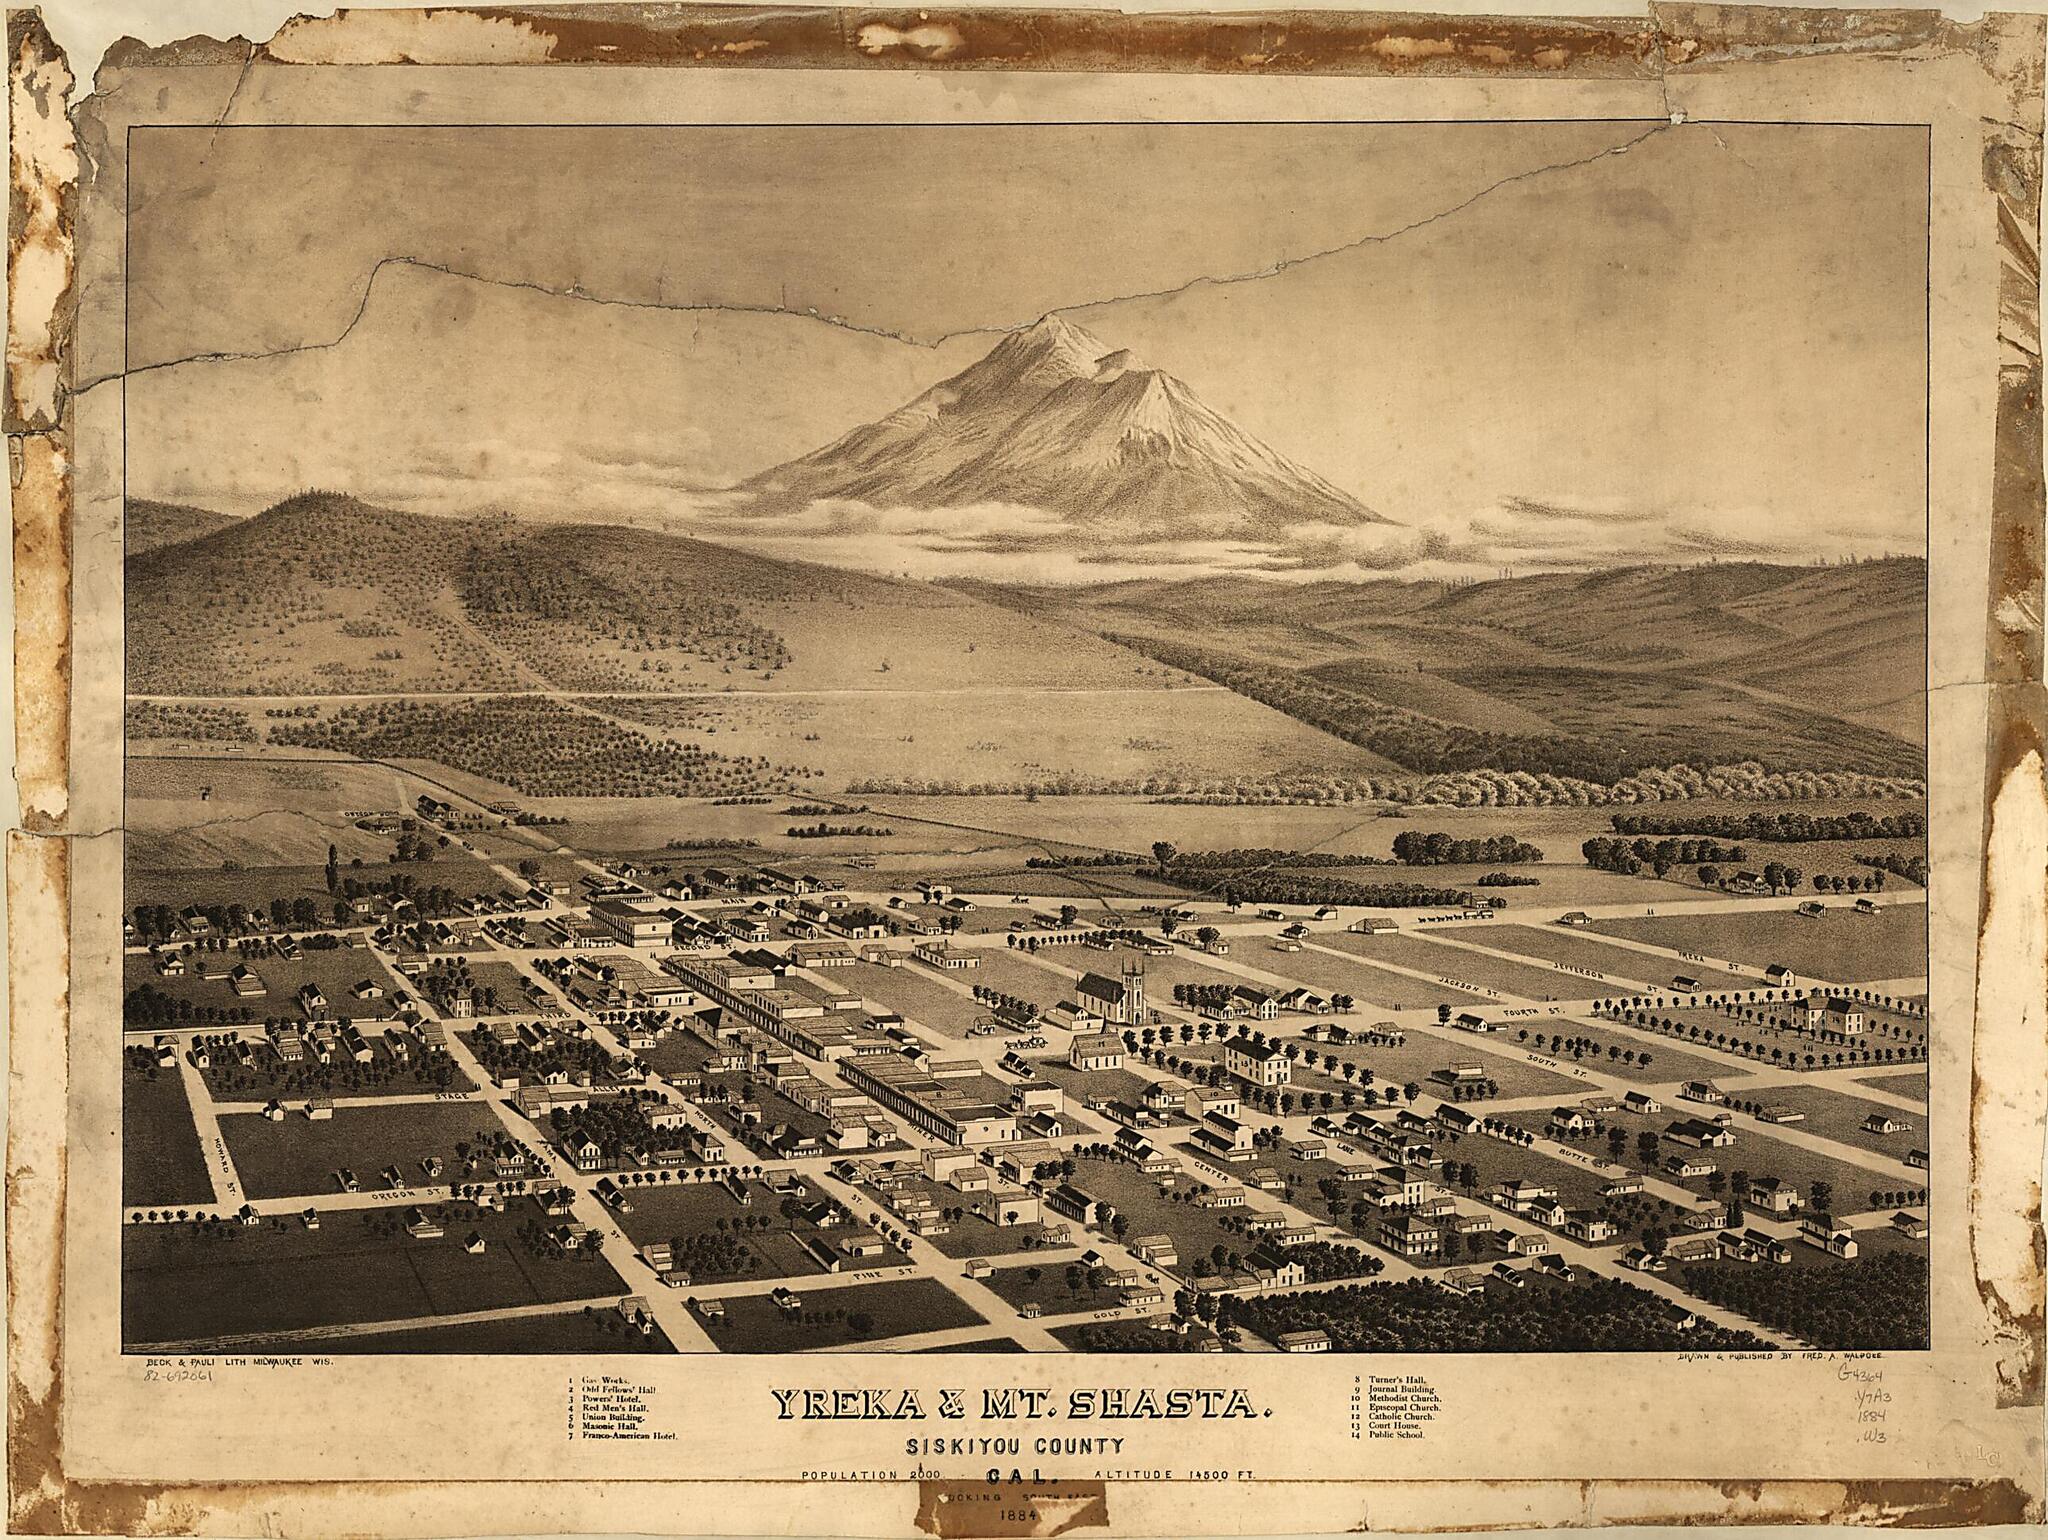 This old map of Yreka &amp; Mt. Shasta, Siskiyou County,California, Looking South East from 1884 was created by  Beck &amp; Pauli, Fred A. Walpole in 1884